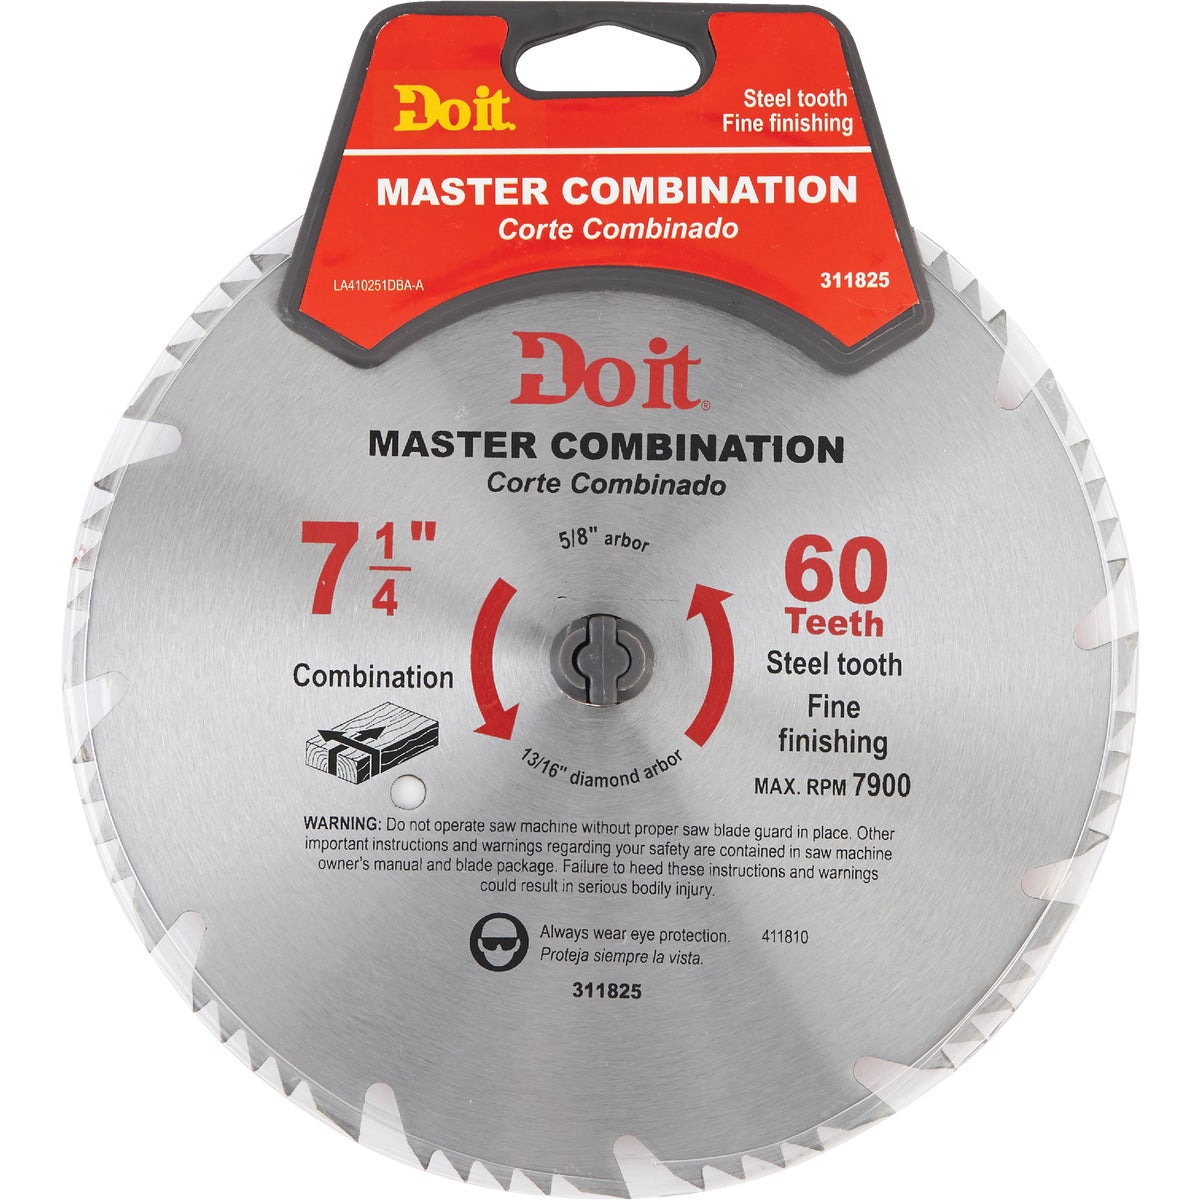 Item 311825, Smoothest cutting combination blade style.